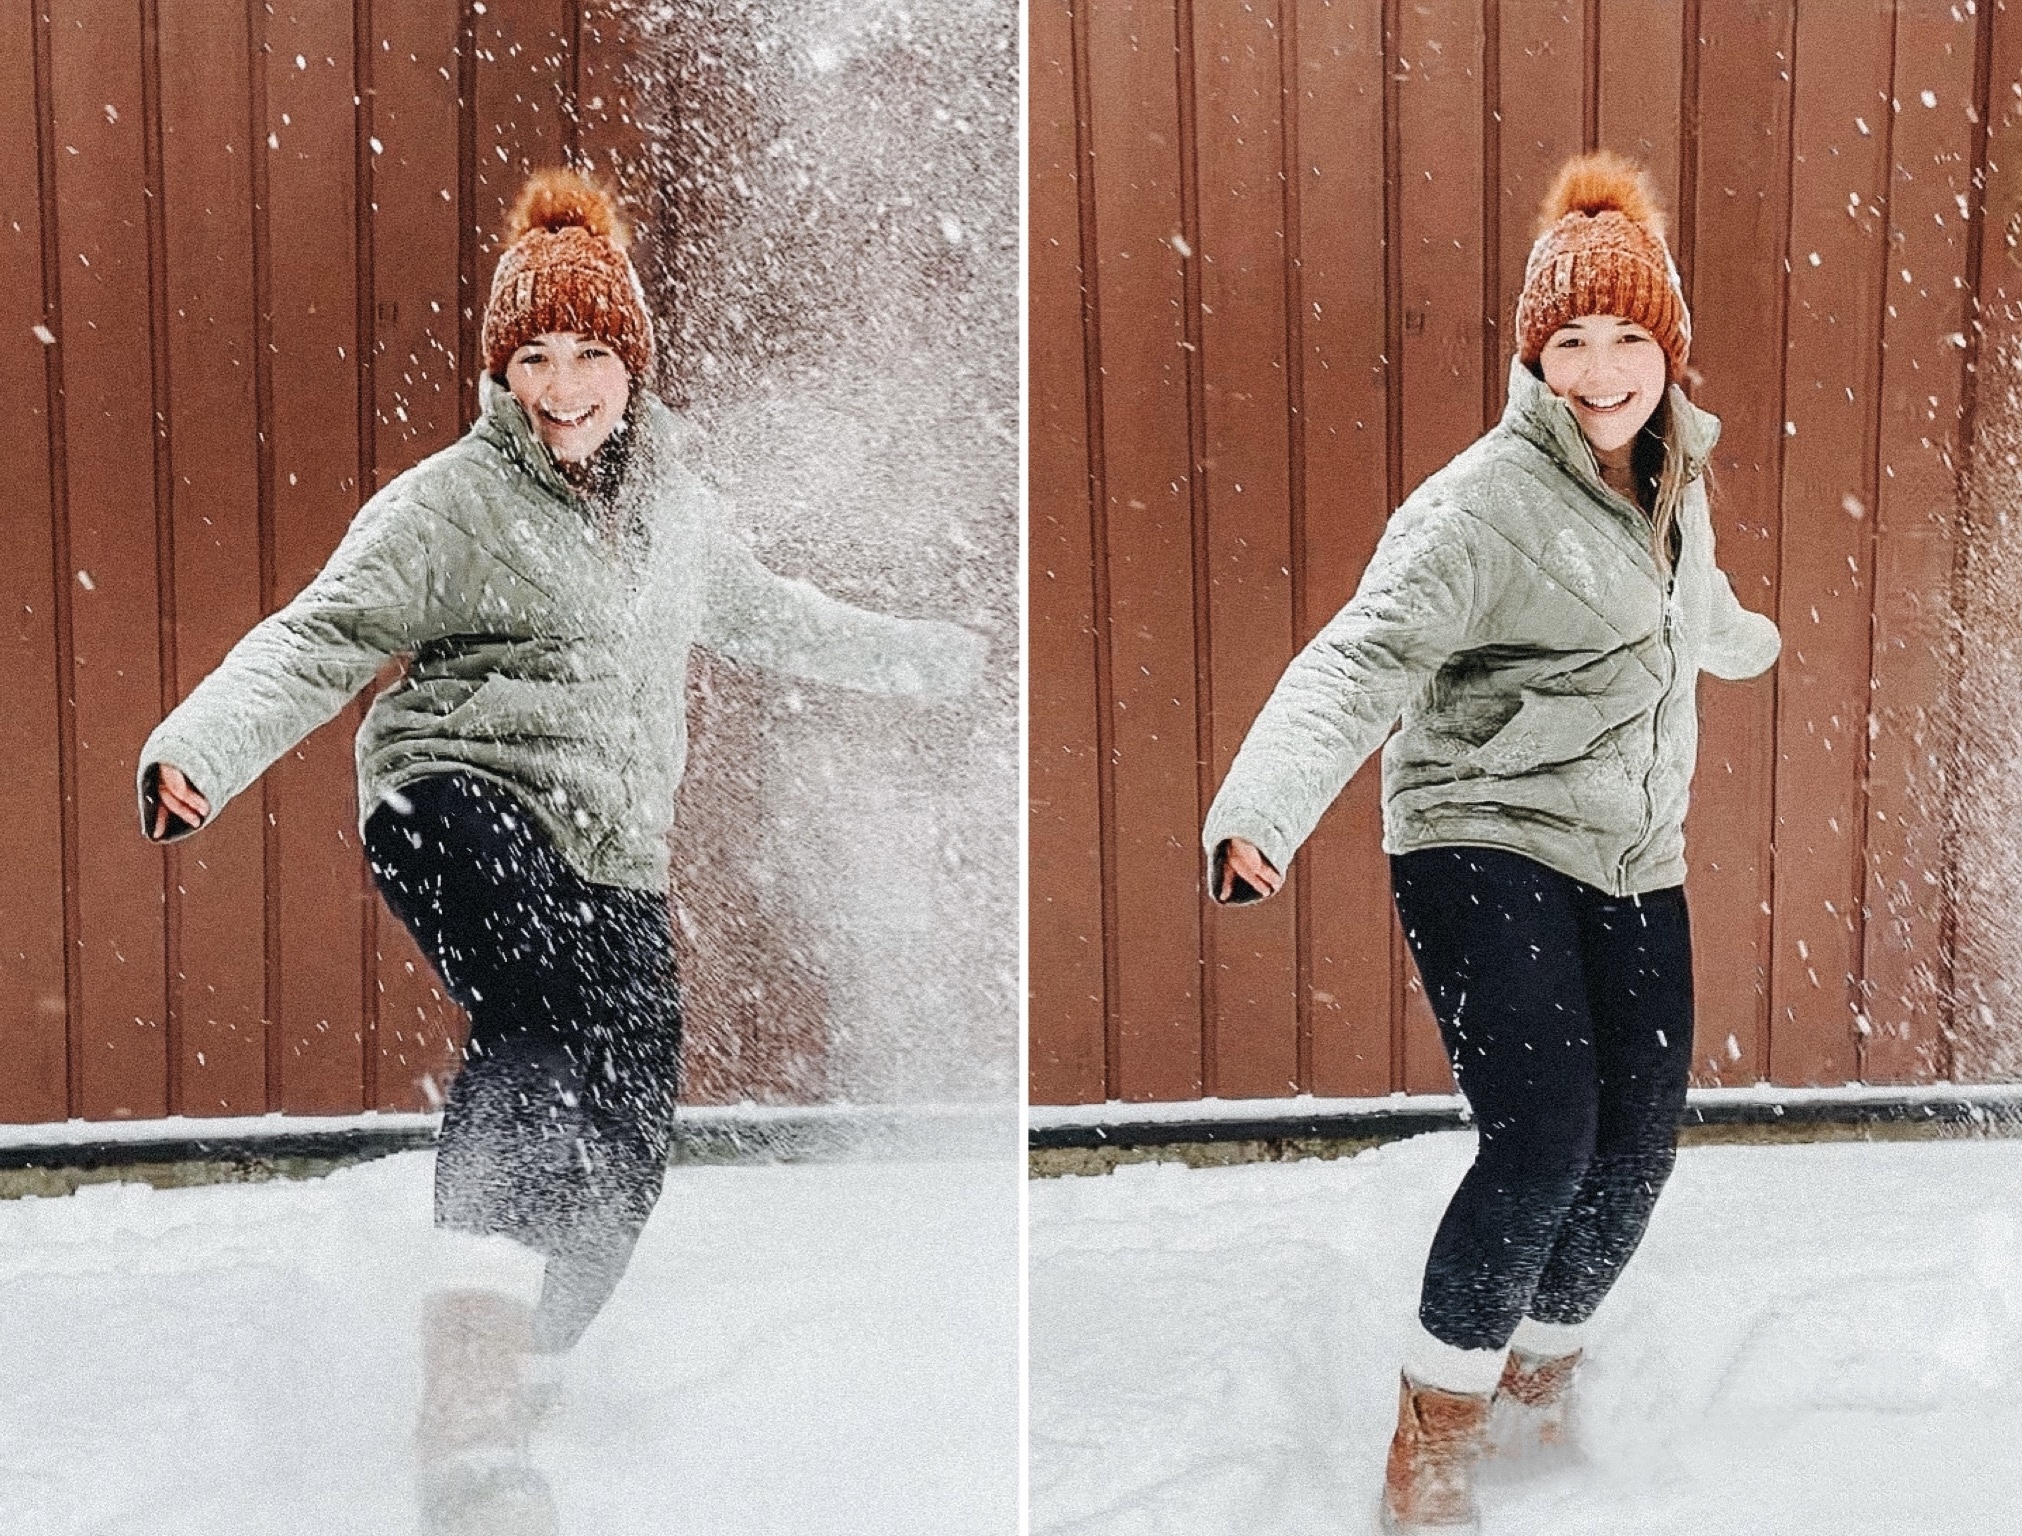 In this image there are two consecutive frames of Alexandra playing in the snow. She is carefree and joyful. Uninhibited by the stressors of diet culture, free to play and enjoy life.